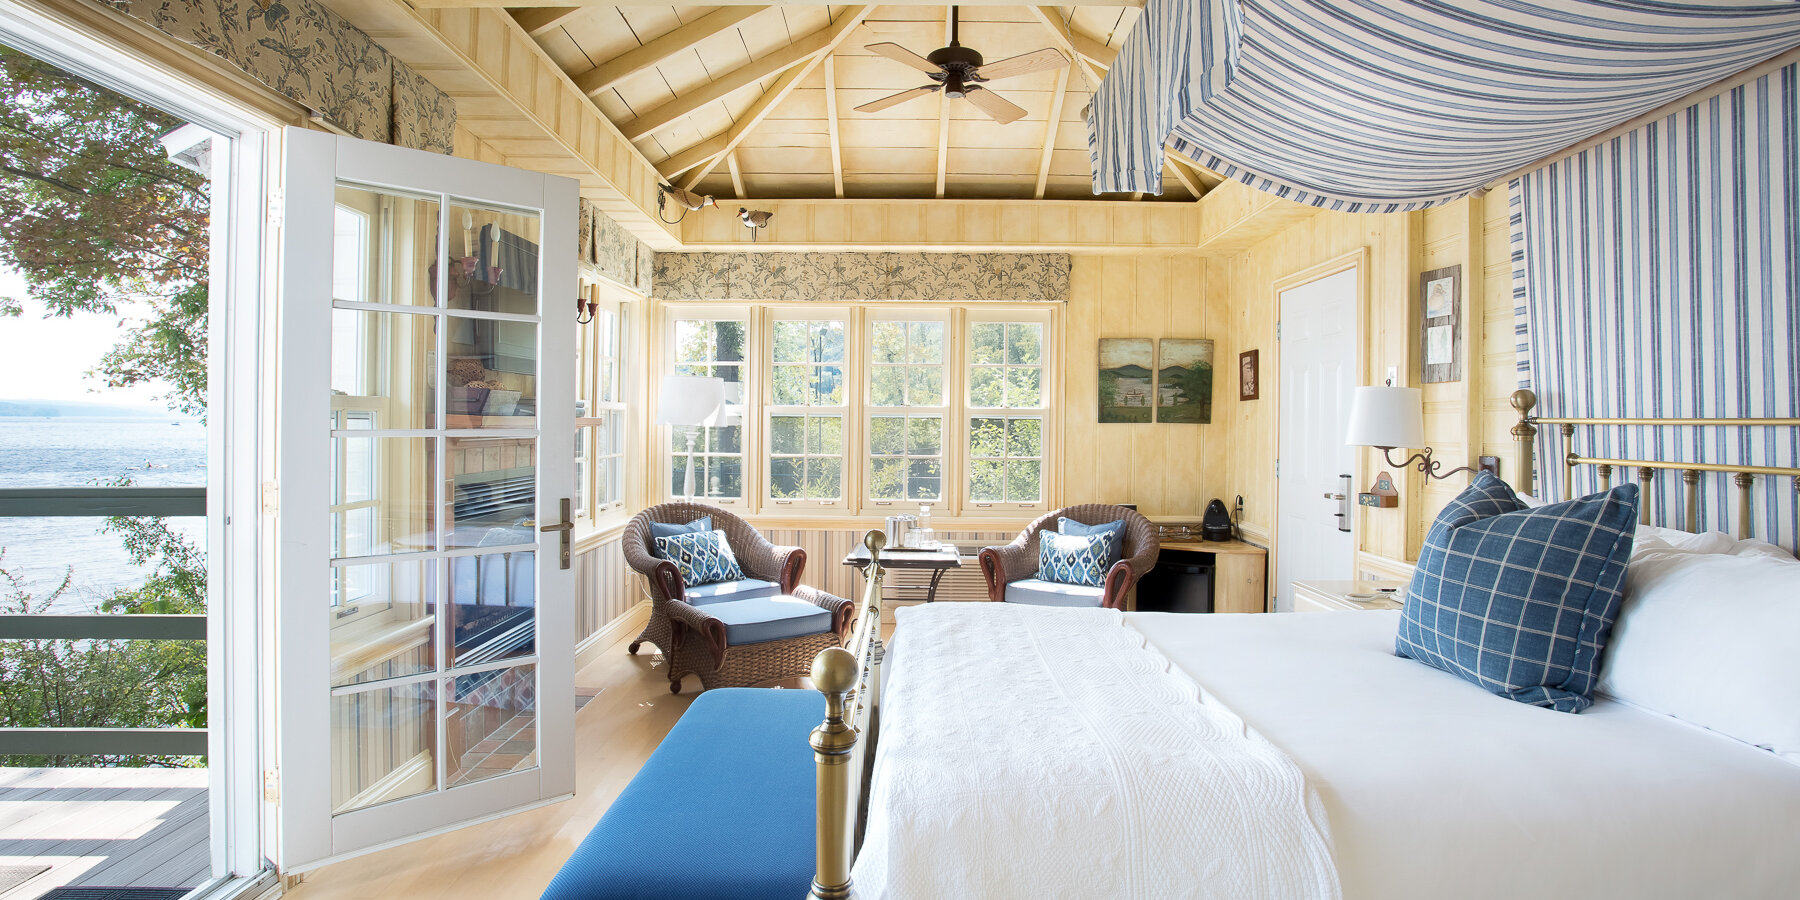 Lakeside chalet with wooden ceiling and king-size bed